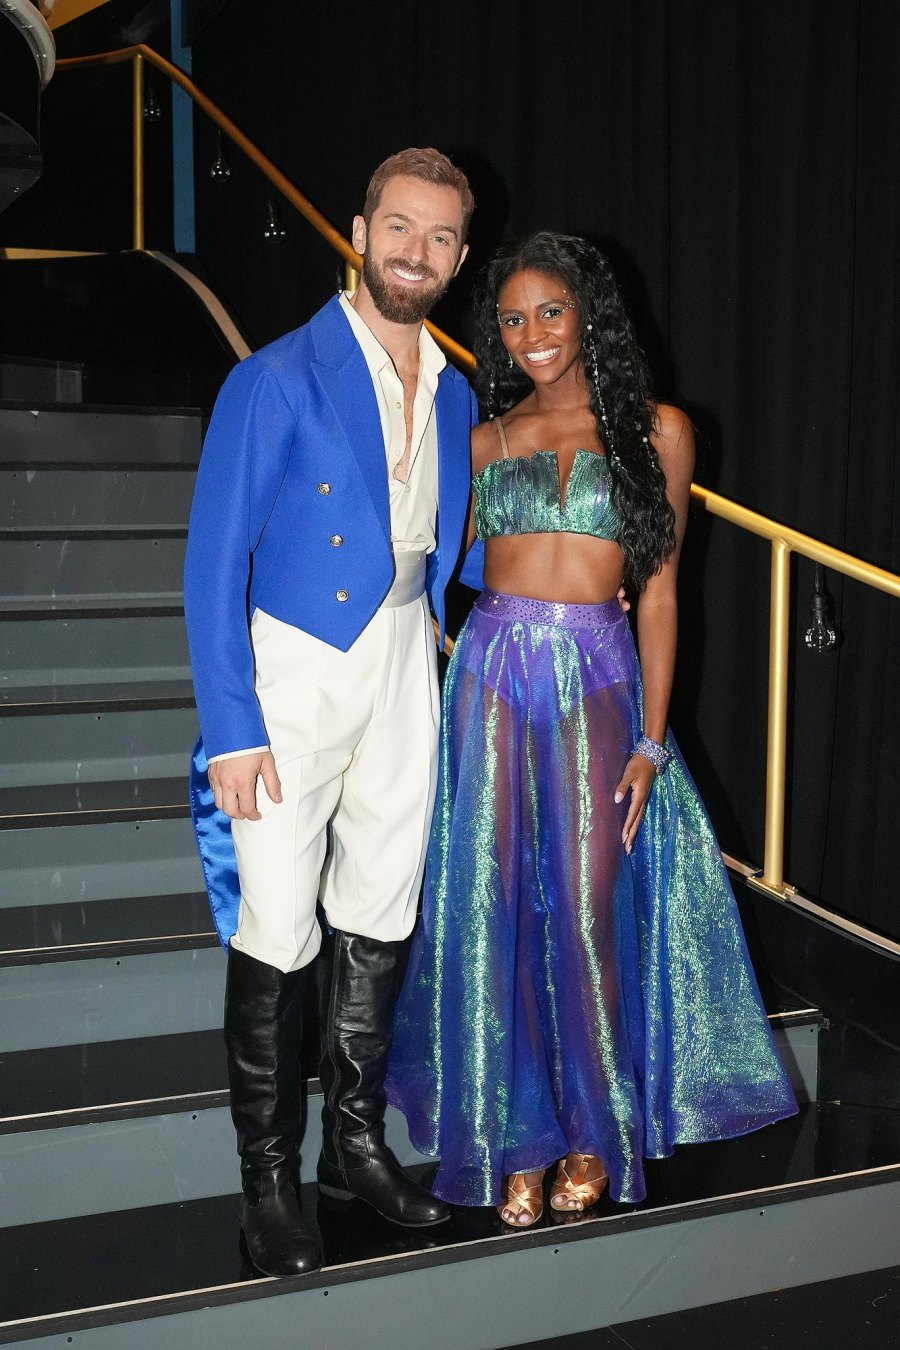 See Who Went Home During Dancing With the Stars Halloween Show